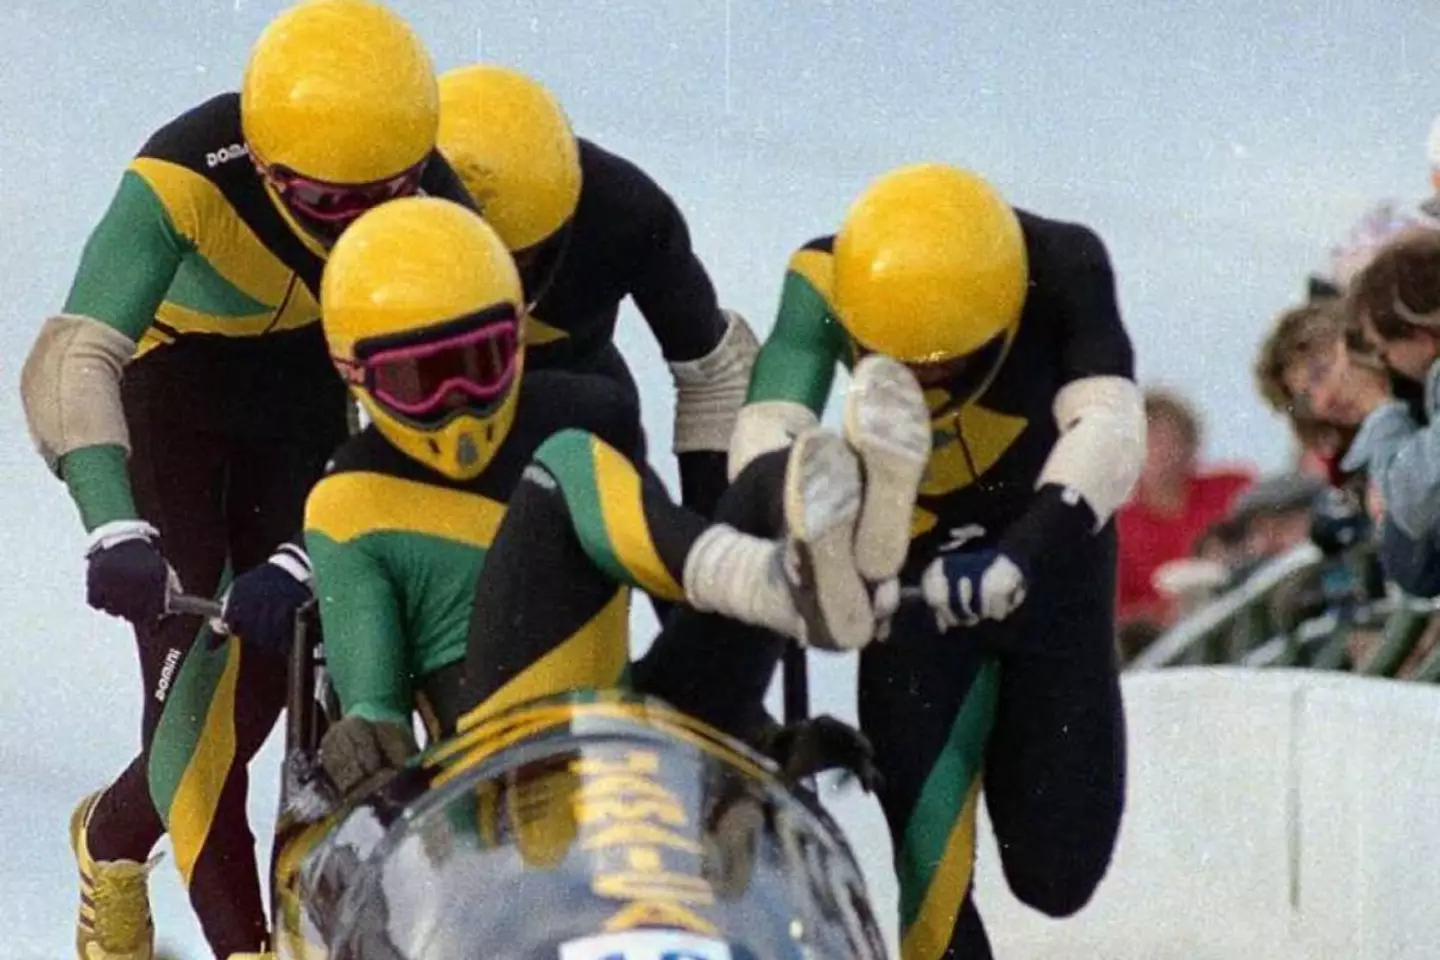 'Cool Runnings' immortalised the Jamaican bobsled team.